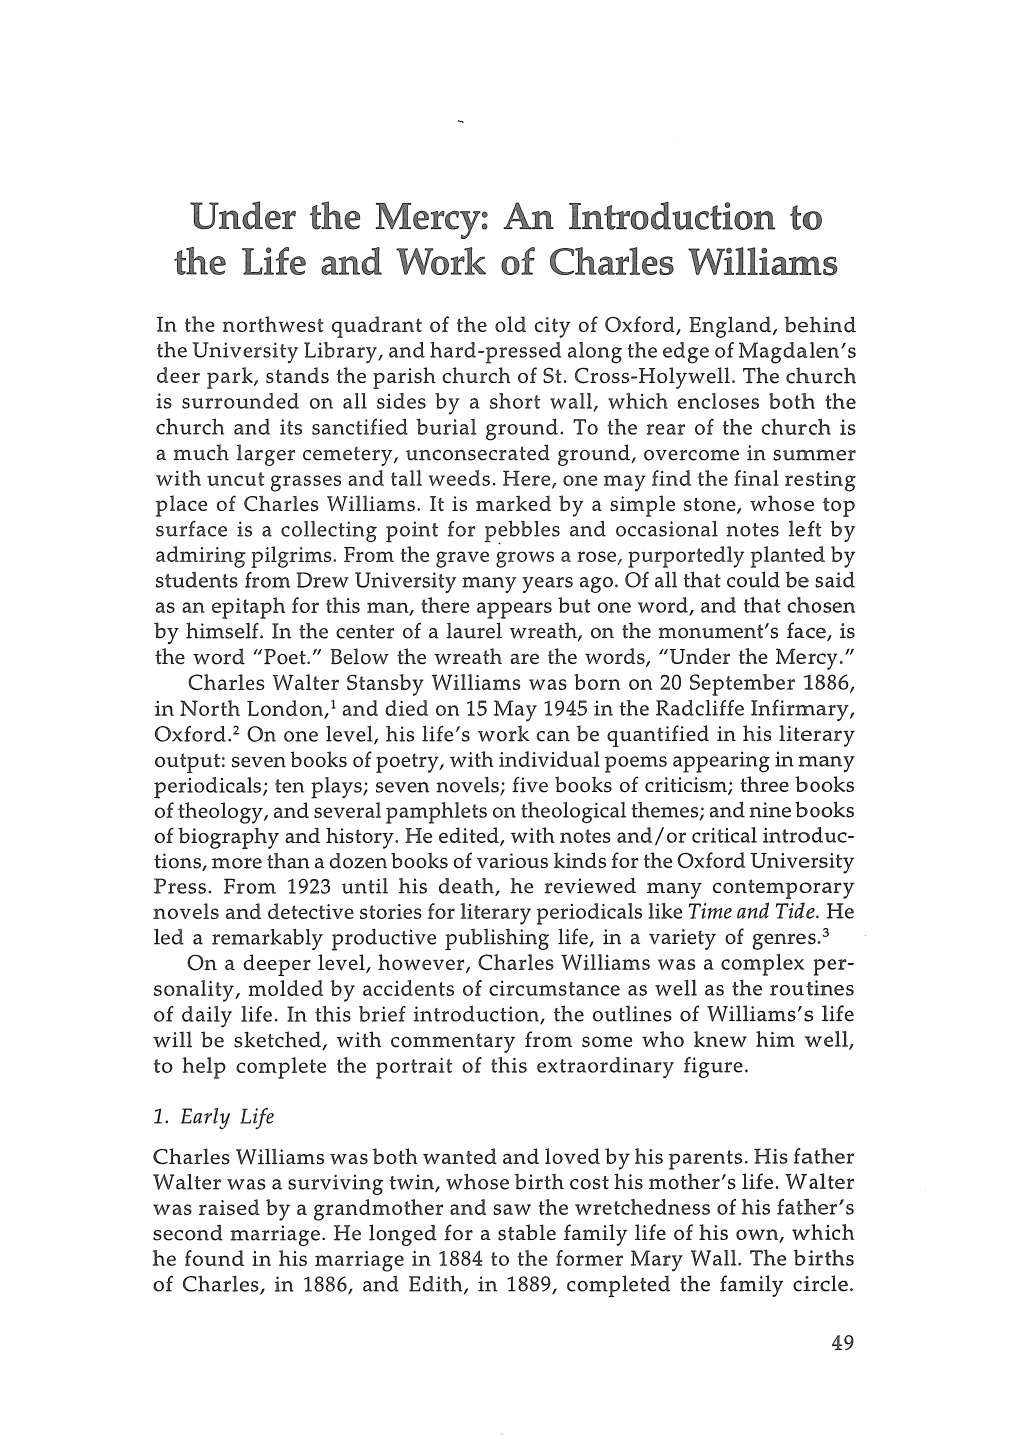 Under the Mercy: an Introduction to the Life and Work of Charles Williams